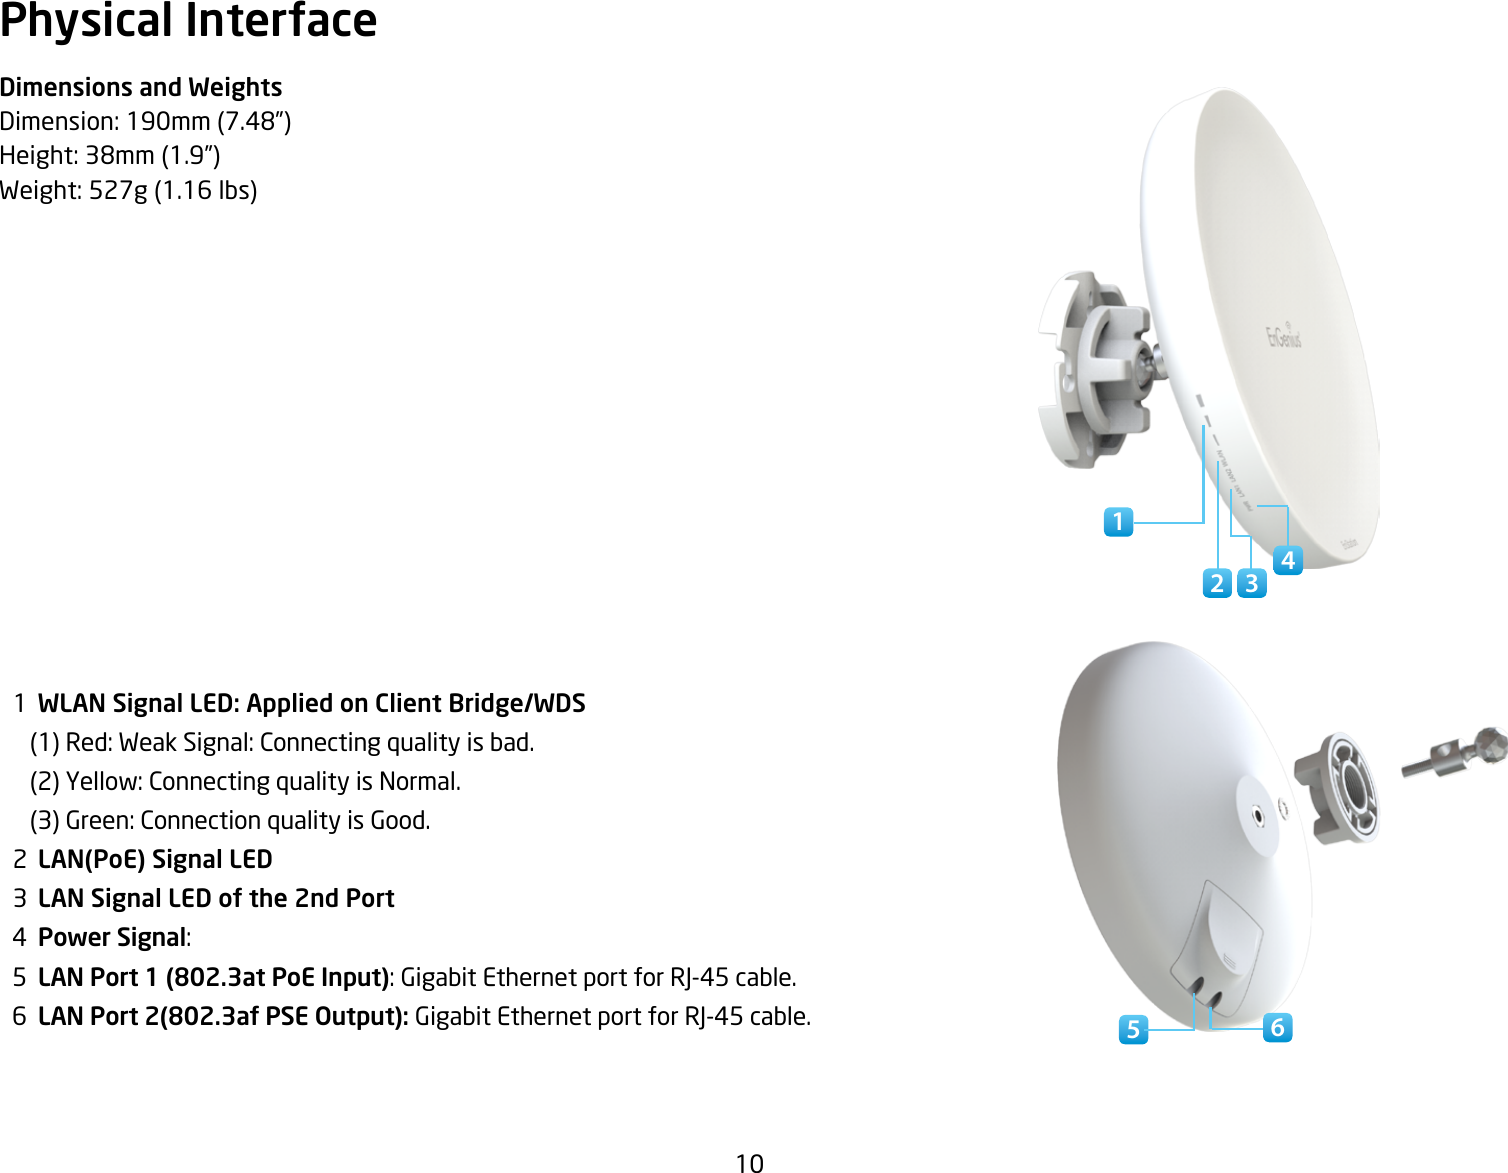 10Physical InterfaceDimensions and WeightsDimension:190mm(7.48”)Height:38mm(1.9”)Weight:527g(1.16lbs)  1  WLAN Signal LED: Applied on Client Bridge/WDS(1)Red:WeakSignal:Connectingqualityisbad.(2)Yellow:ConnectingqualityisNormal.(3)Green:ConnectionqualityisGood.  2  LAN(PoE) Signal LED  3  LAN Signal LED of the 2nd Port  4  Power Signal:   5  LAN Port 1 (802.3at PoE Input): Gigabit Ethernet port for RJ-45 cable.  6  LAN Port 2(802.3af PSE Output): Gigabit Ethernet port for RJ-45 cable. 54162 3